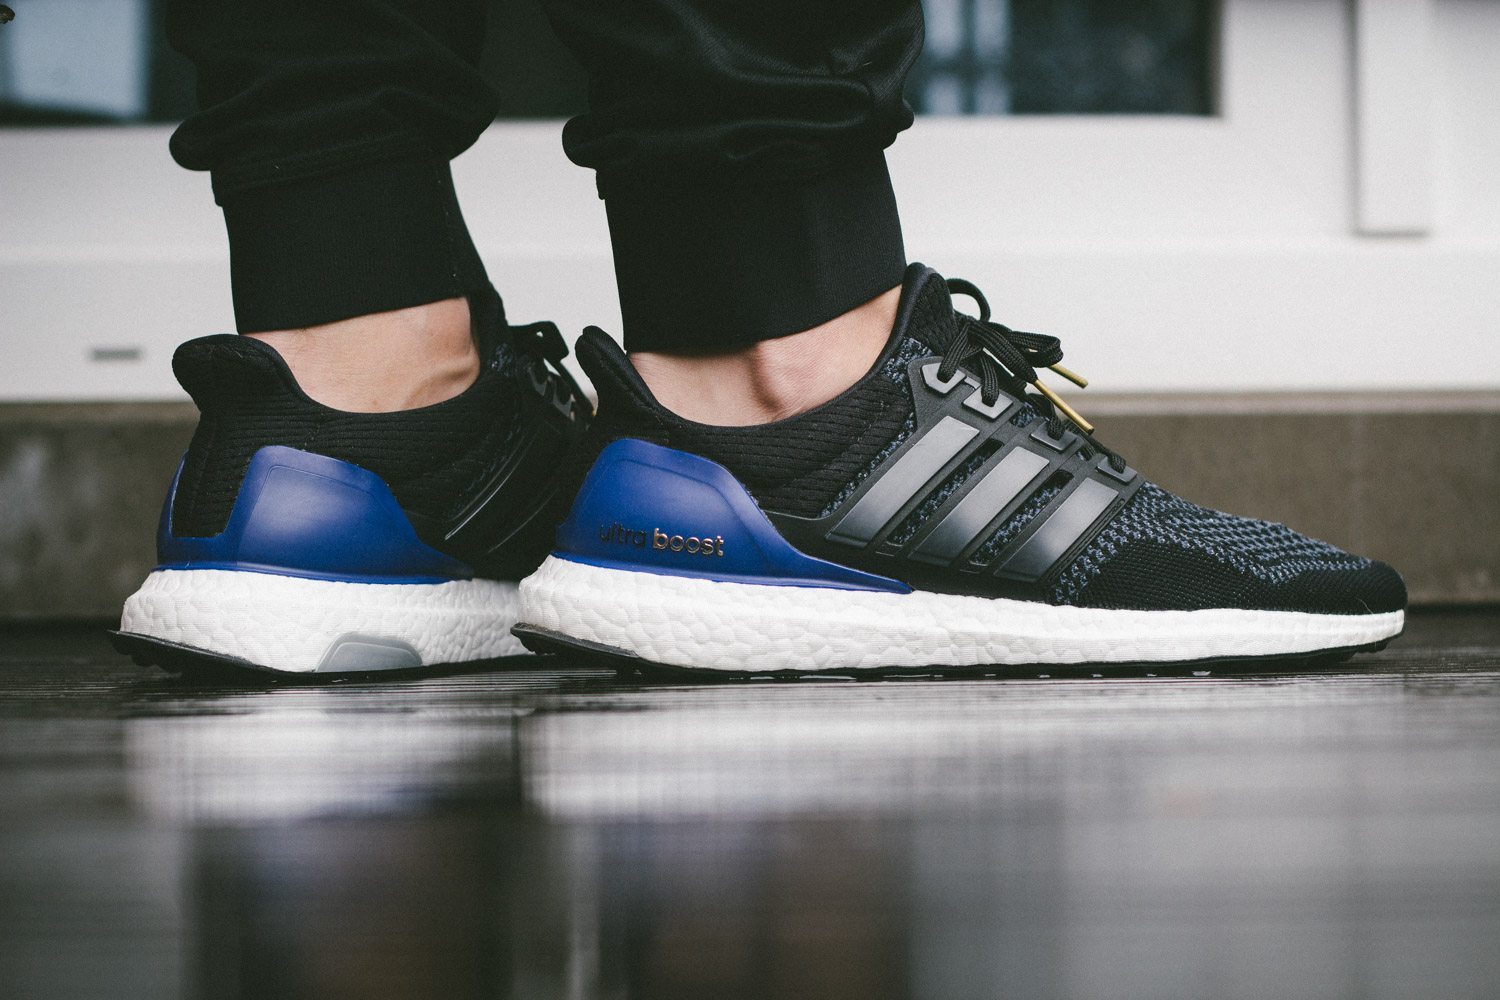 ultraboost black and blue